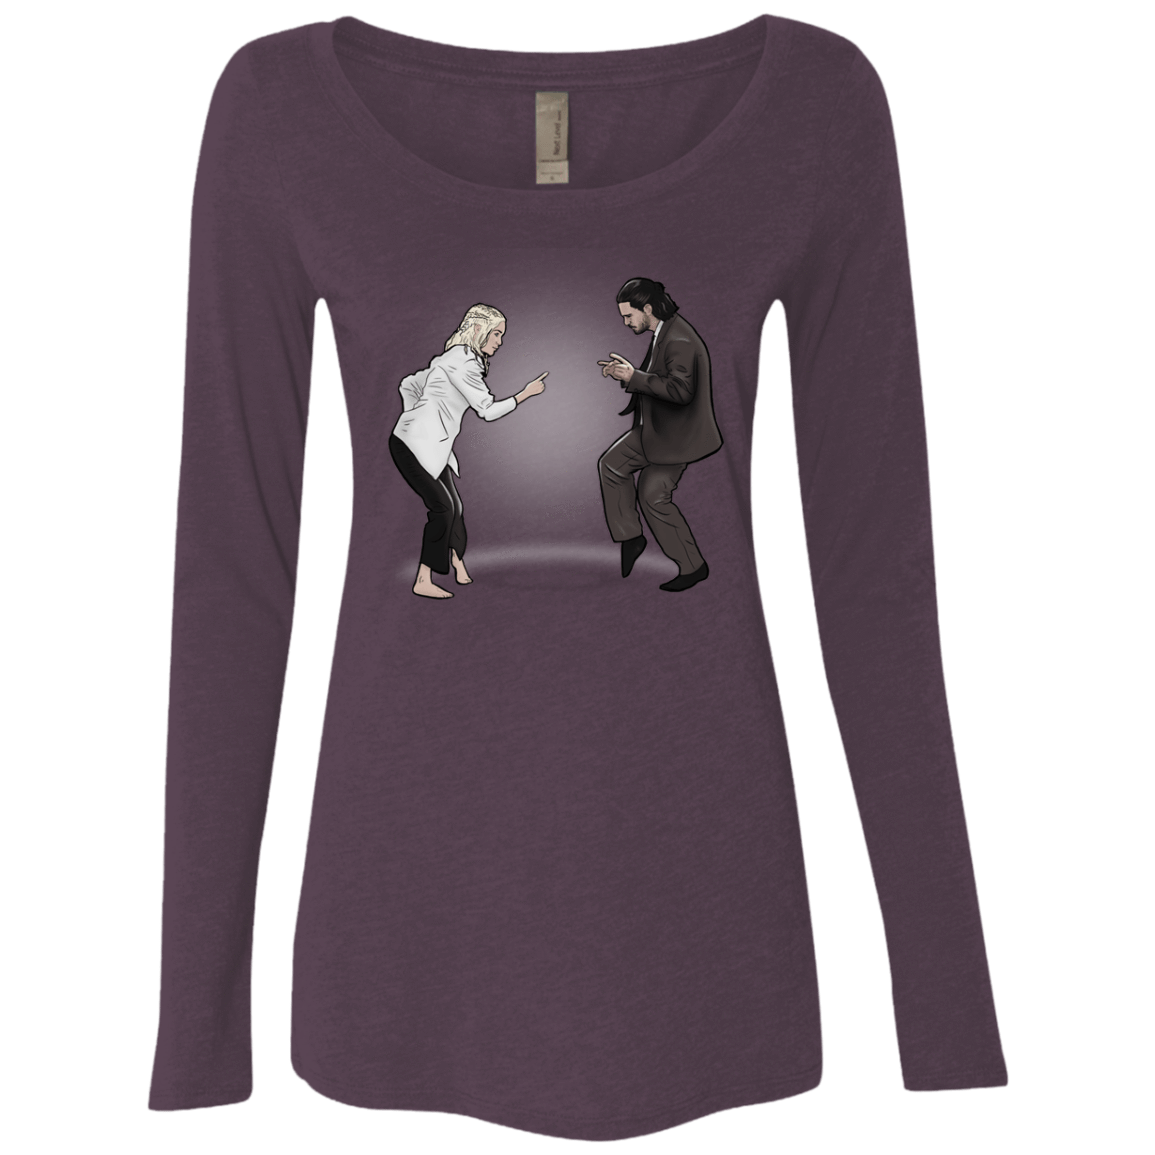 T-Shirts Vintage Purple / S The Ballad of Jon and Dany Women's Triblend Long Sleeve Shirt